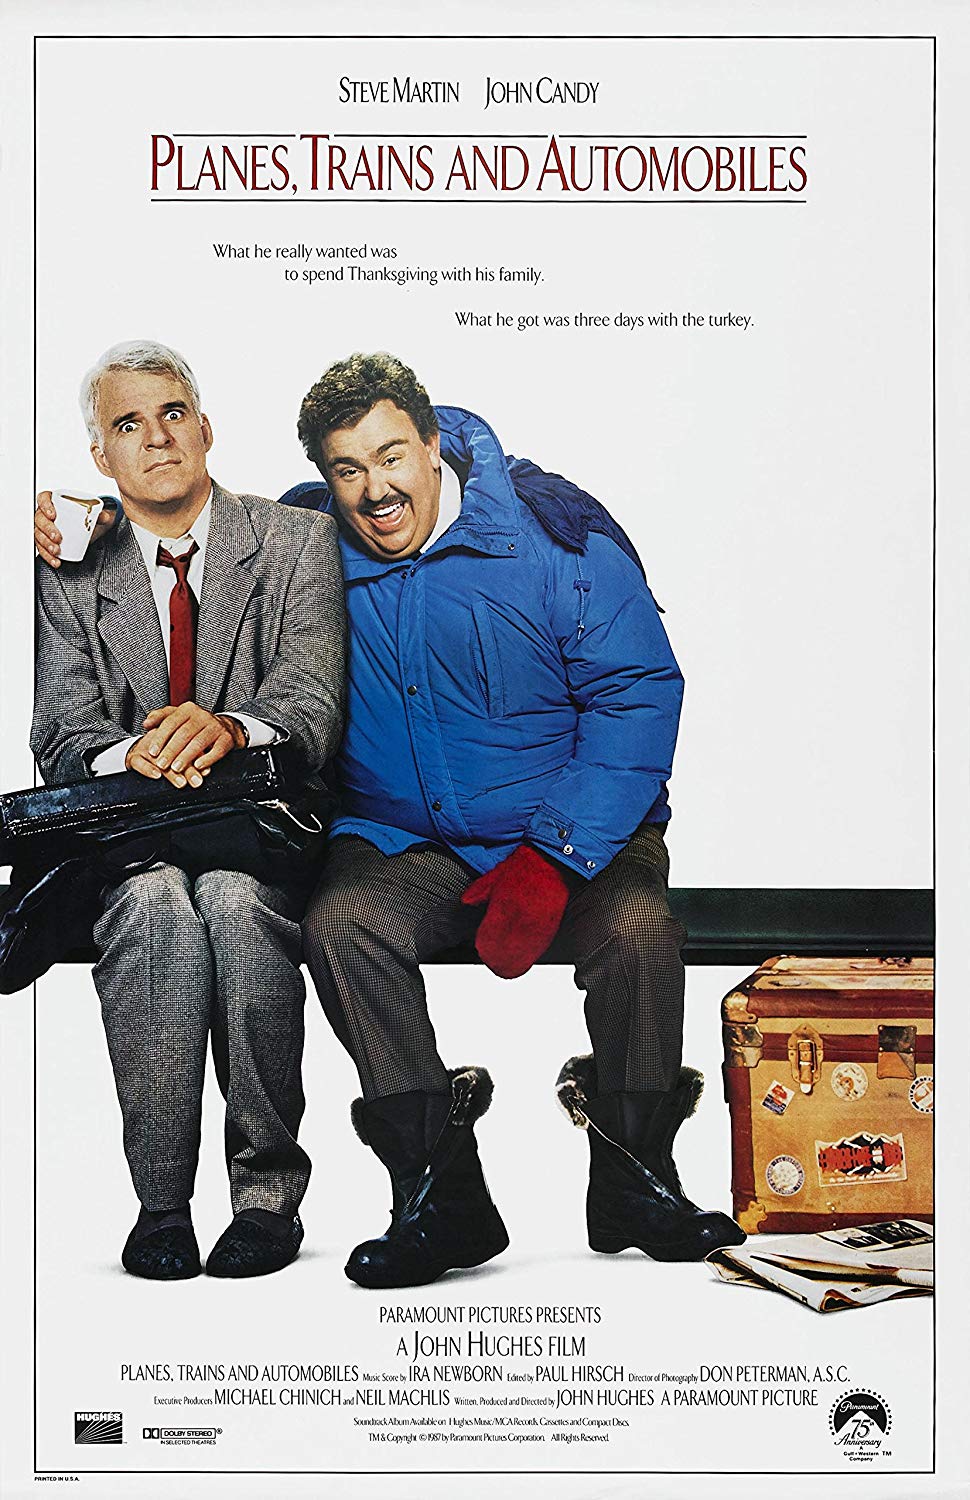 The movie poster for Planes, Trains & Automobiles